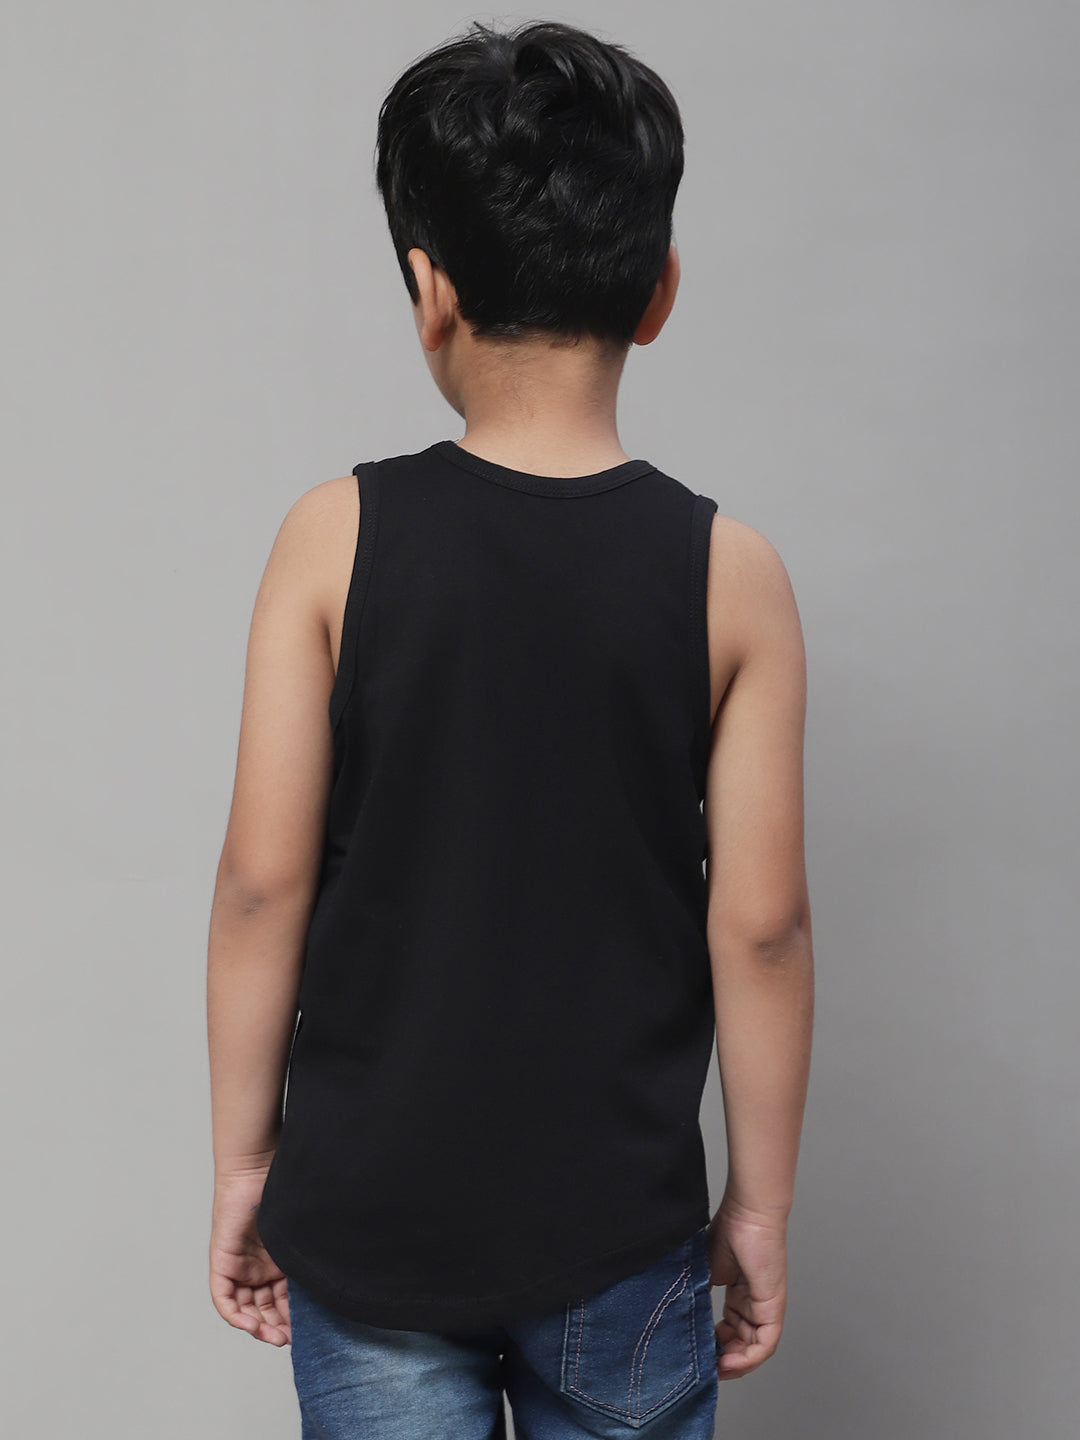 Kids Too Cool Pure Cotton Printed Innerwear Vest - Friskers